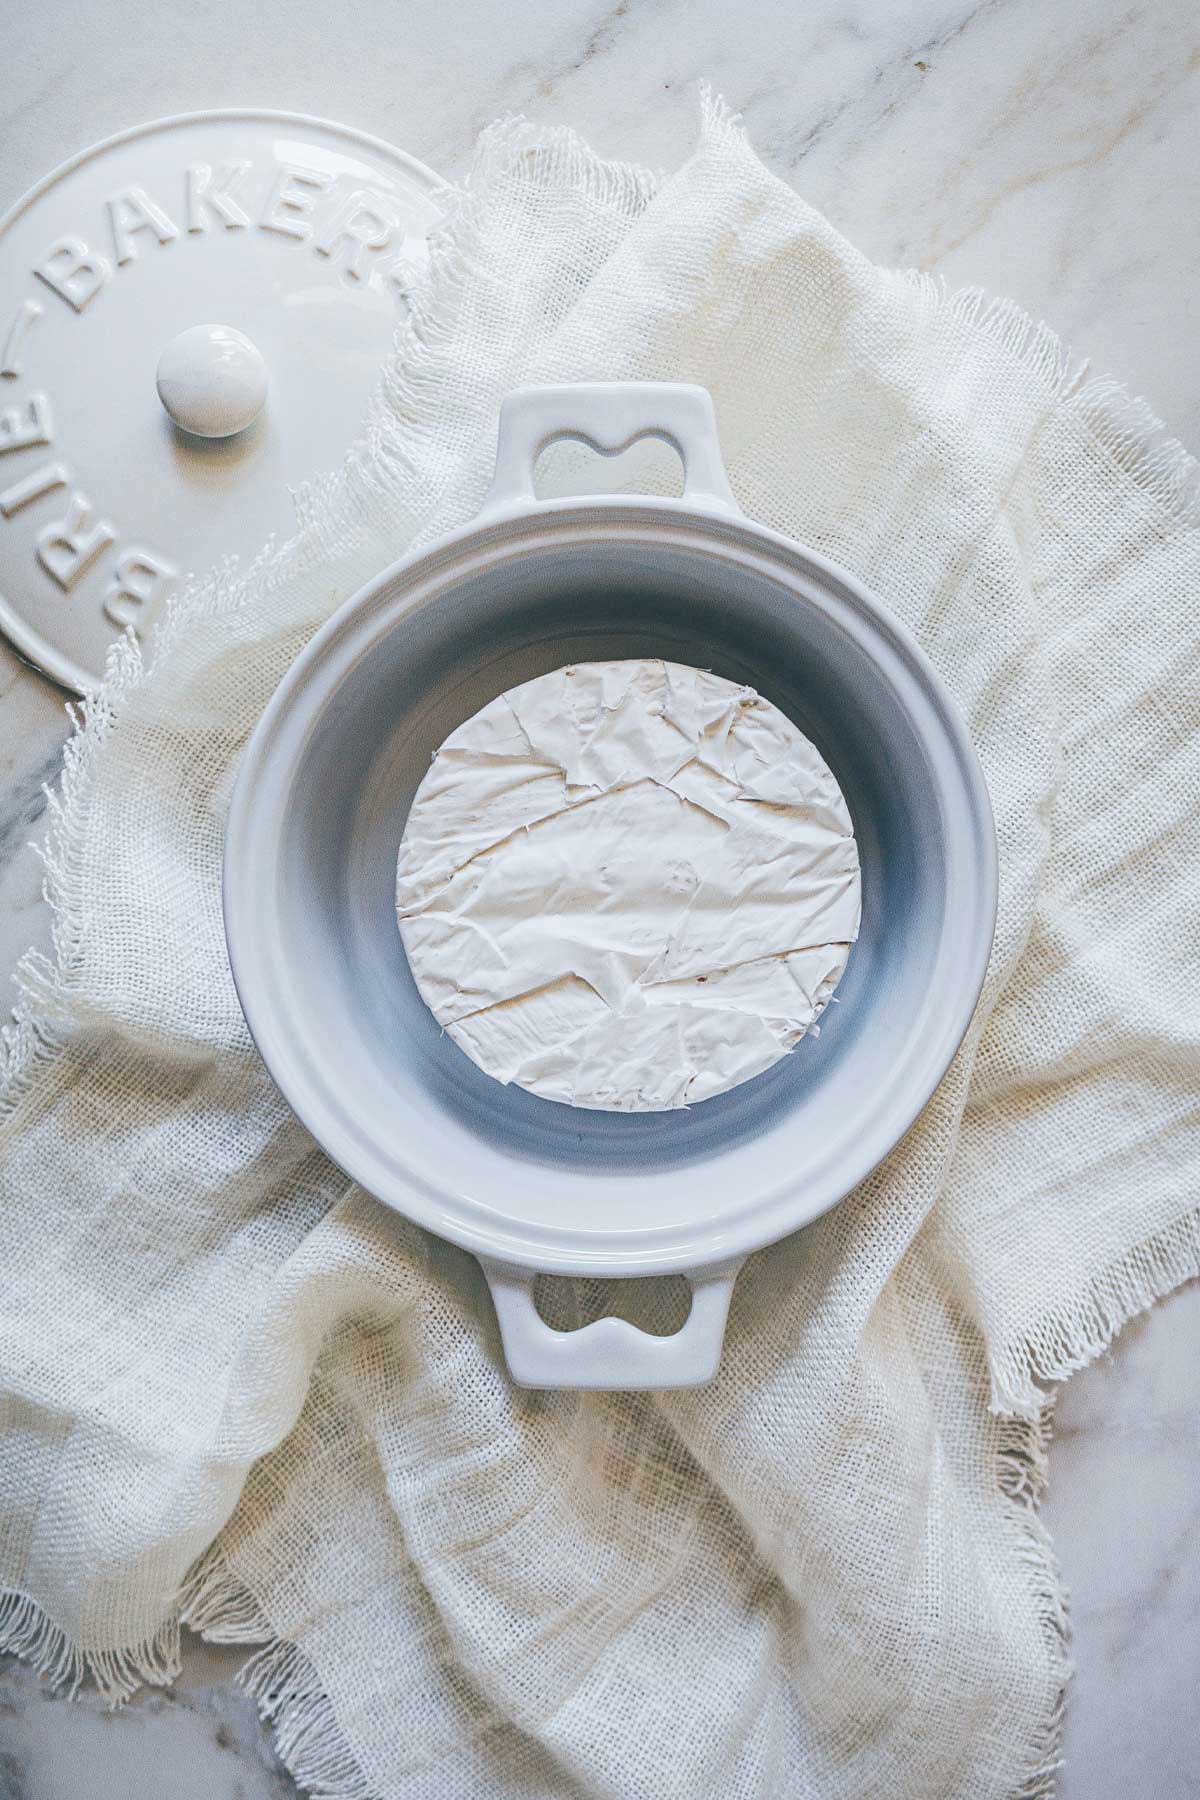 A white ceramic brie baker with the top off showing a white, crinkly wheel of Brie cheese inside, waiting to be baked.